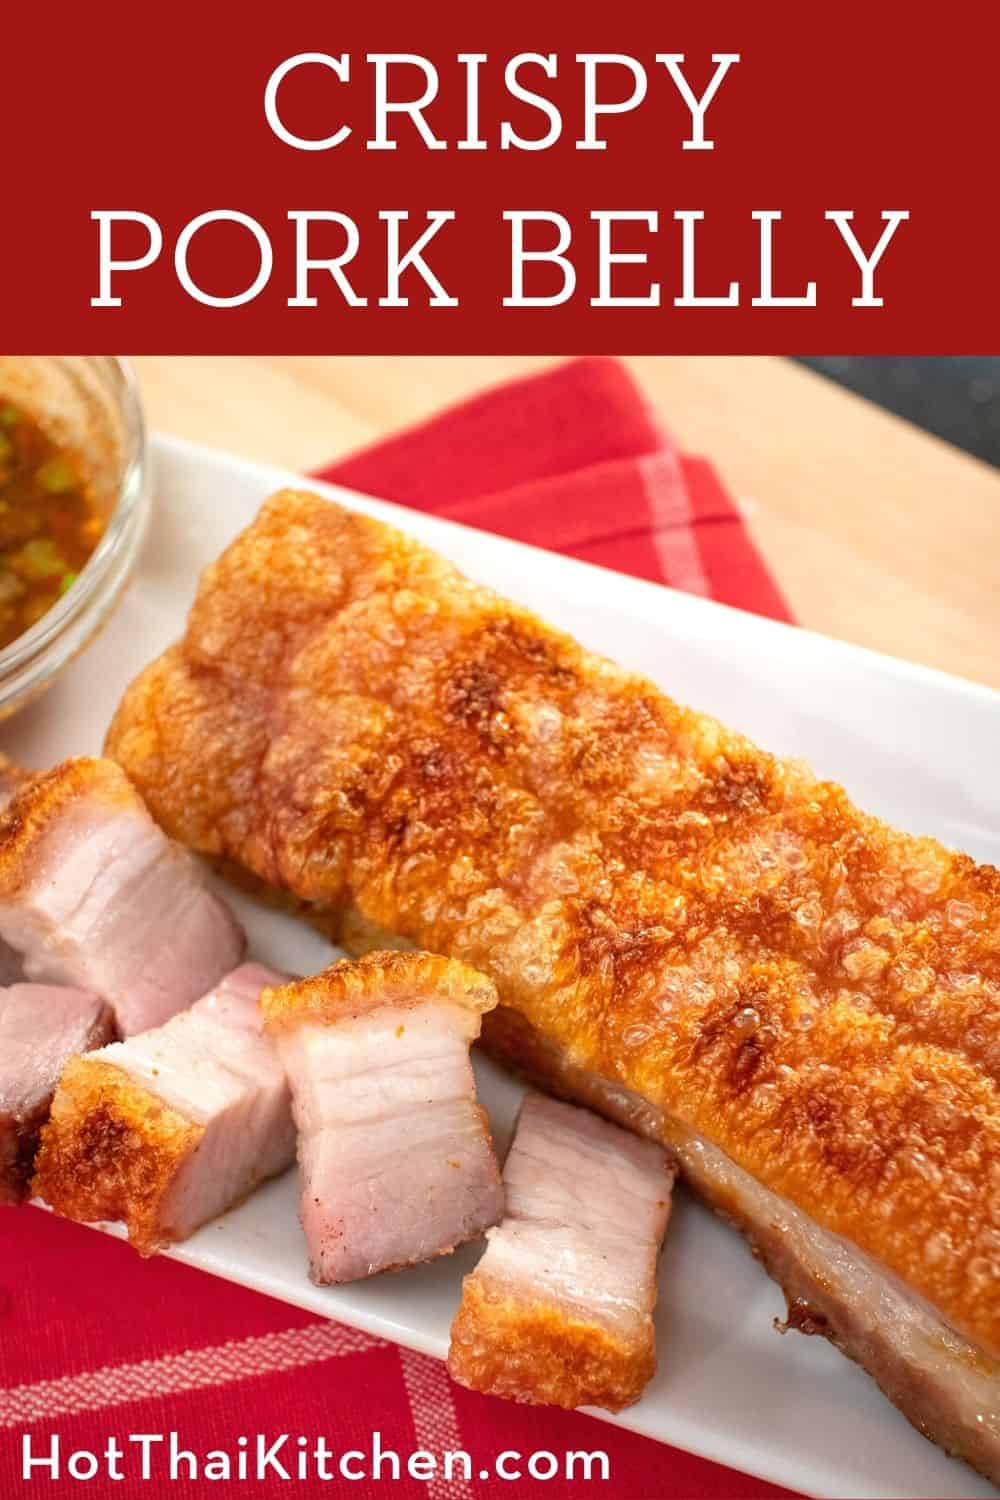 Foolproof recipe for the perfect crispy pork belly with bubbly puffy skin and perfectly juicy meat. No boiling, no frying, no salt crust! #crispyporkbelly #hotthaiktichen #chineseporkbelly